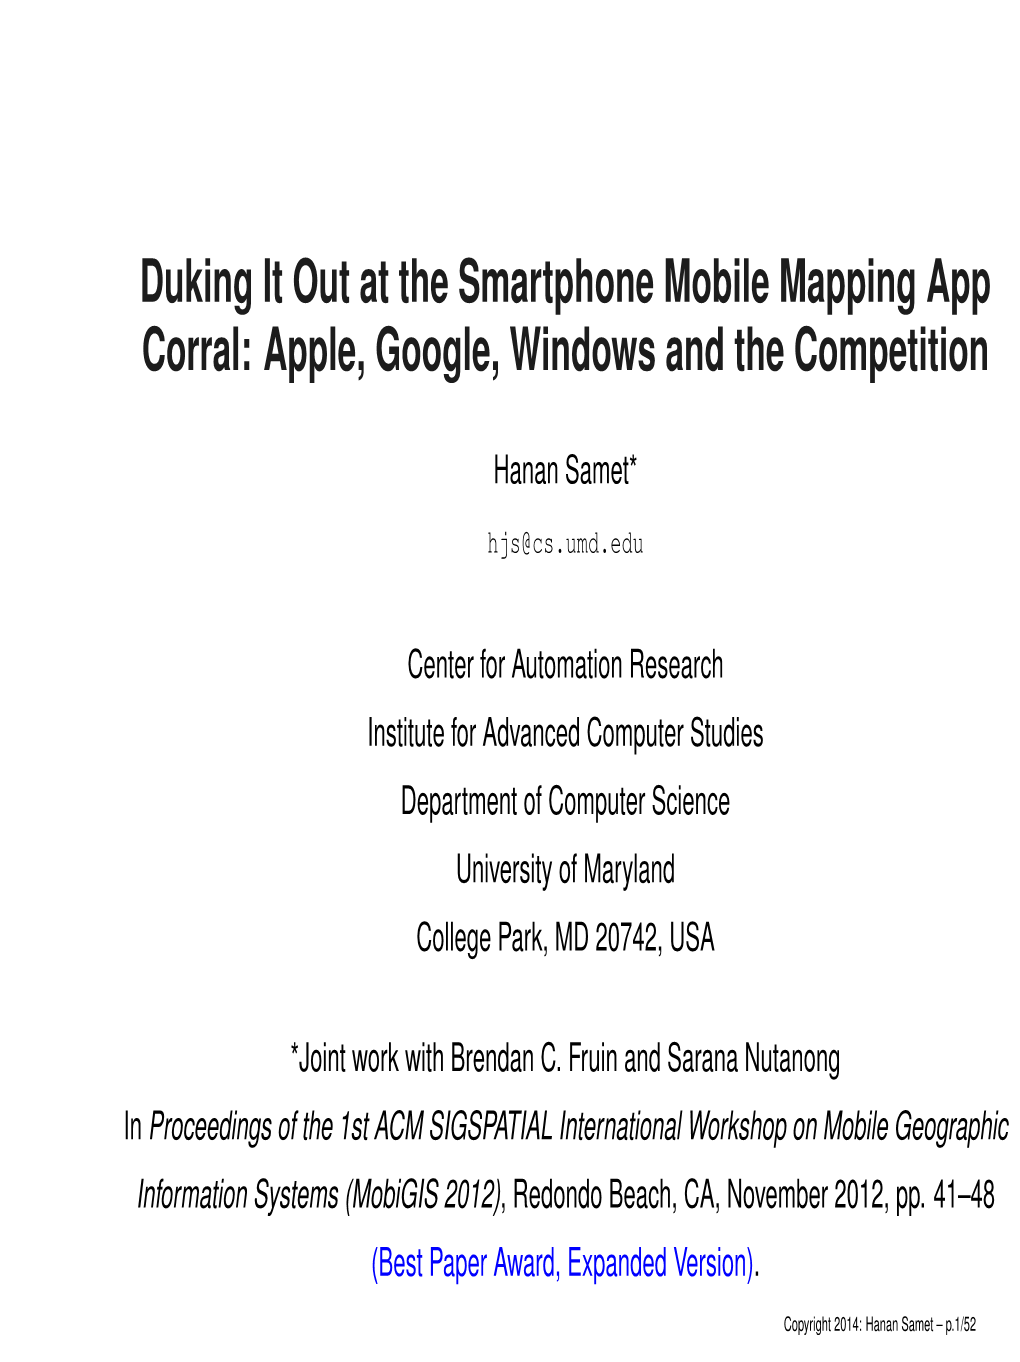 Duking It out at the Smartphone Mobile App Mapping API Corral